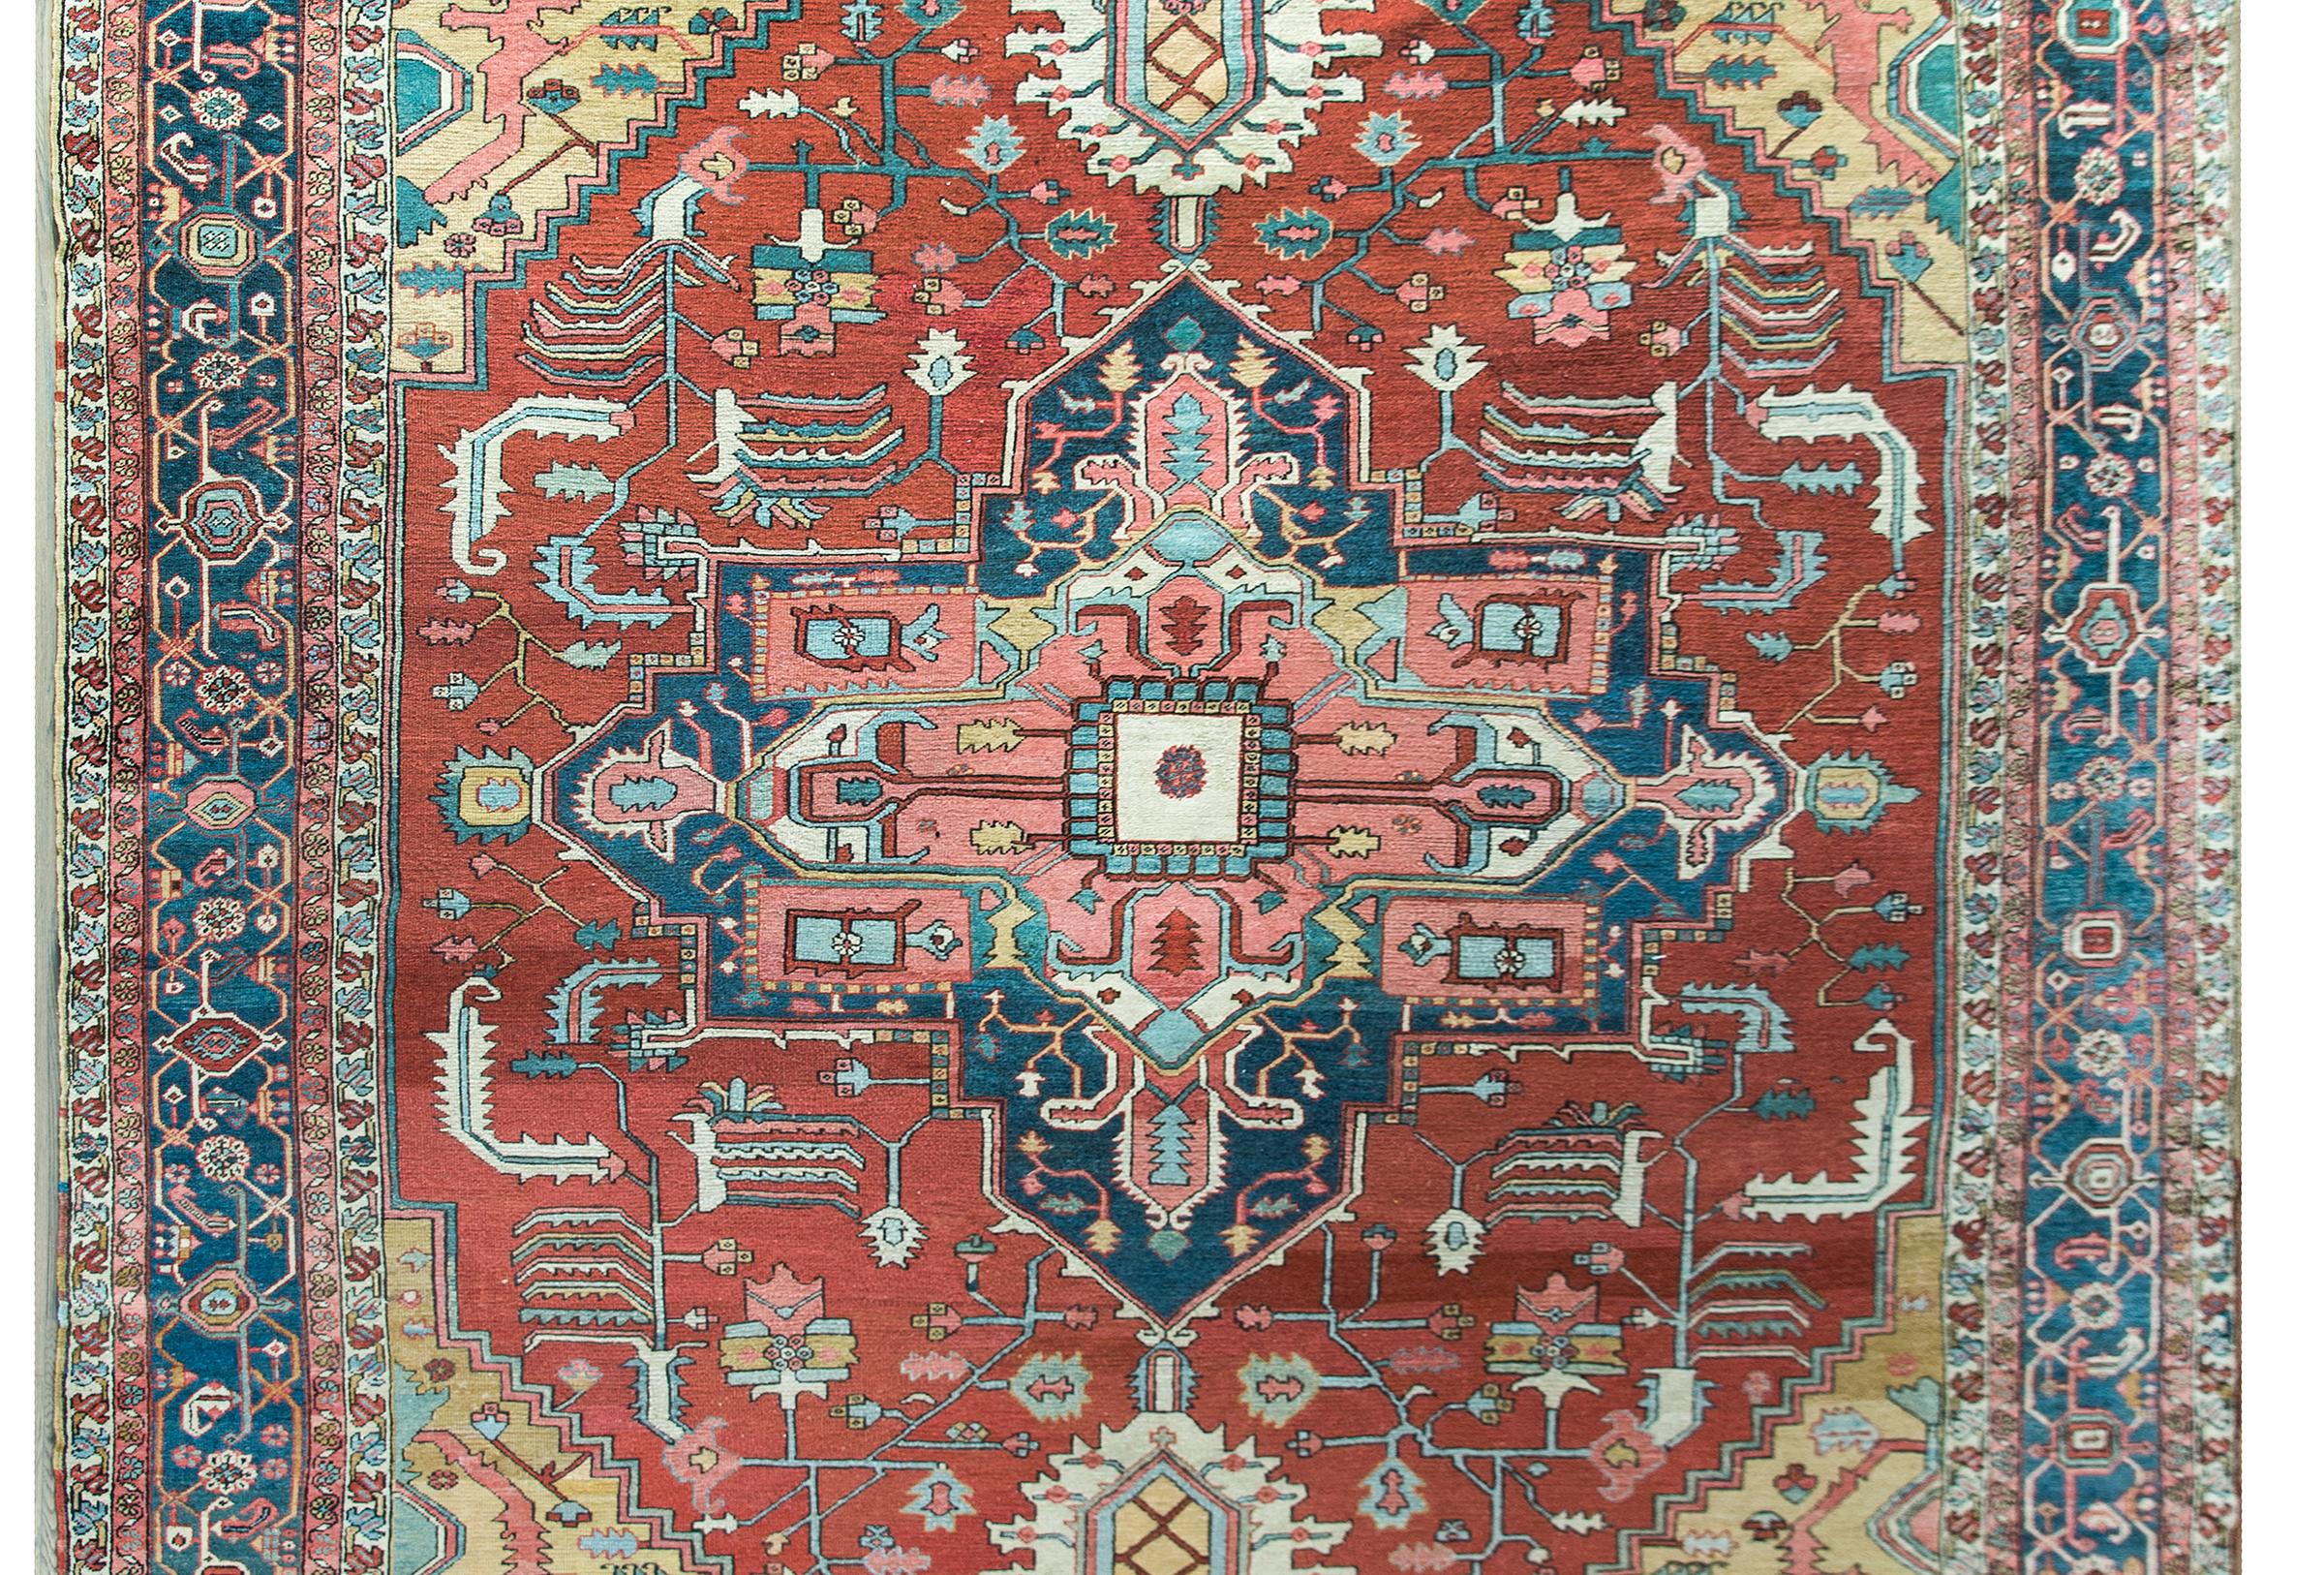 A remarkable late 19th century Persian Serapi rug with the a fabulous large central floral medallion living among a field with myriad stylized scrolling vines and flowers and woven in pinks, whites, golds, greens, and indigos, and all set against an